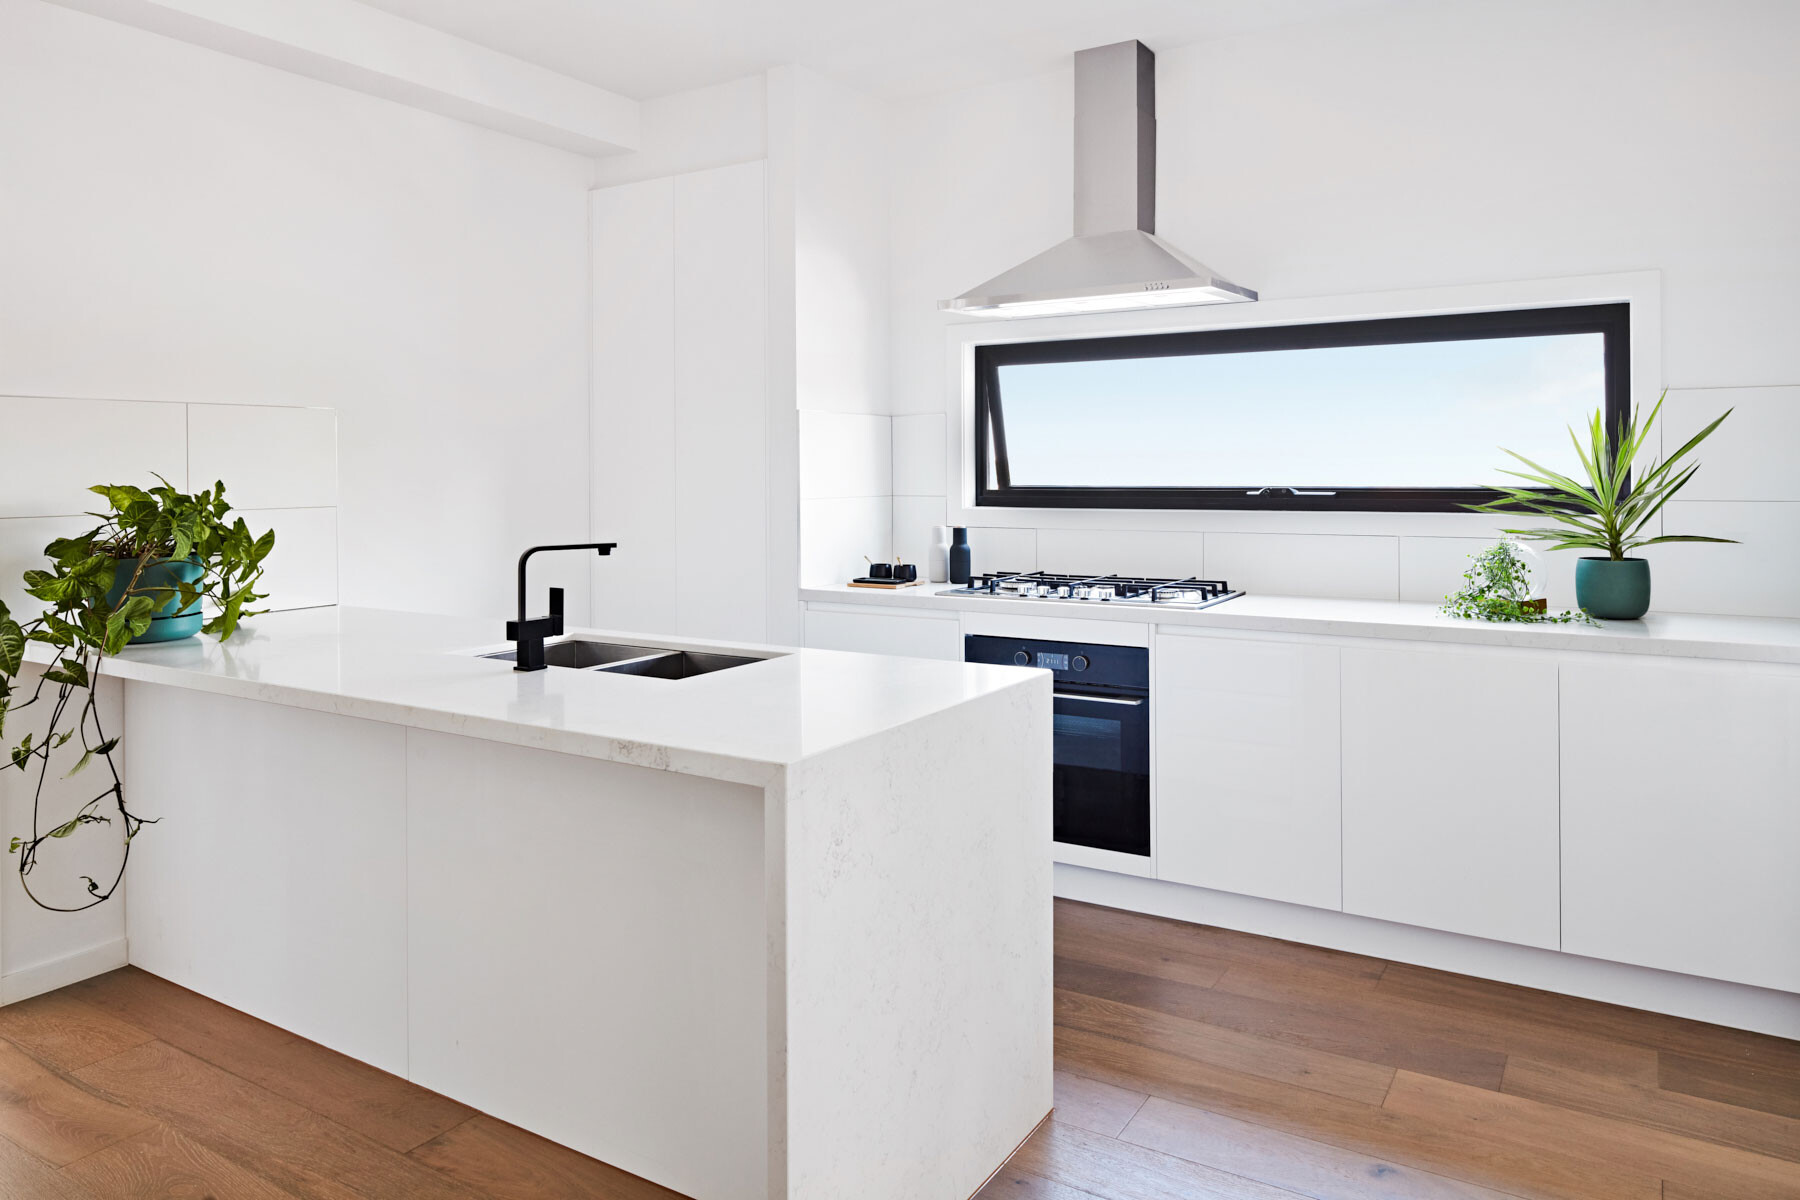 white kitchen with black appliances and rangehood in front of a narrow horizontal window